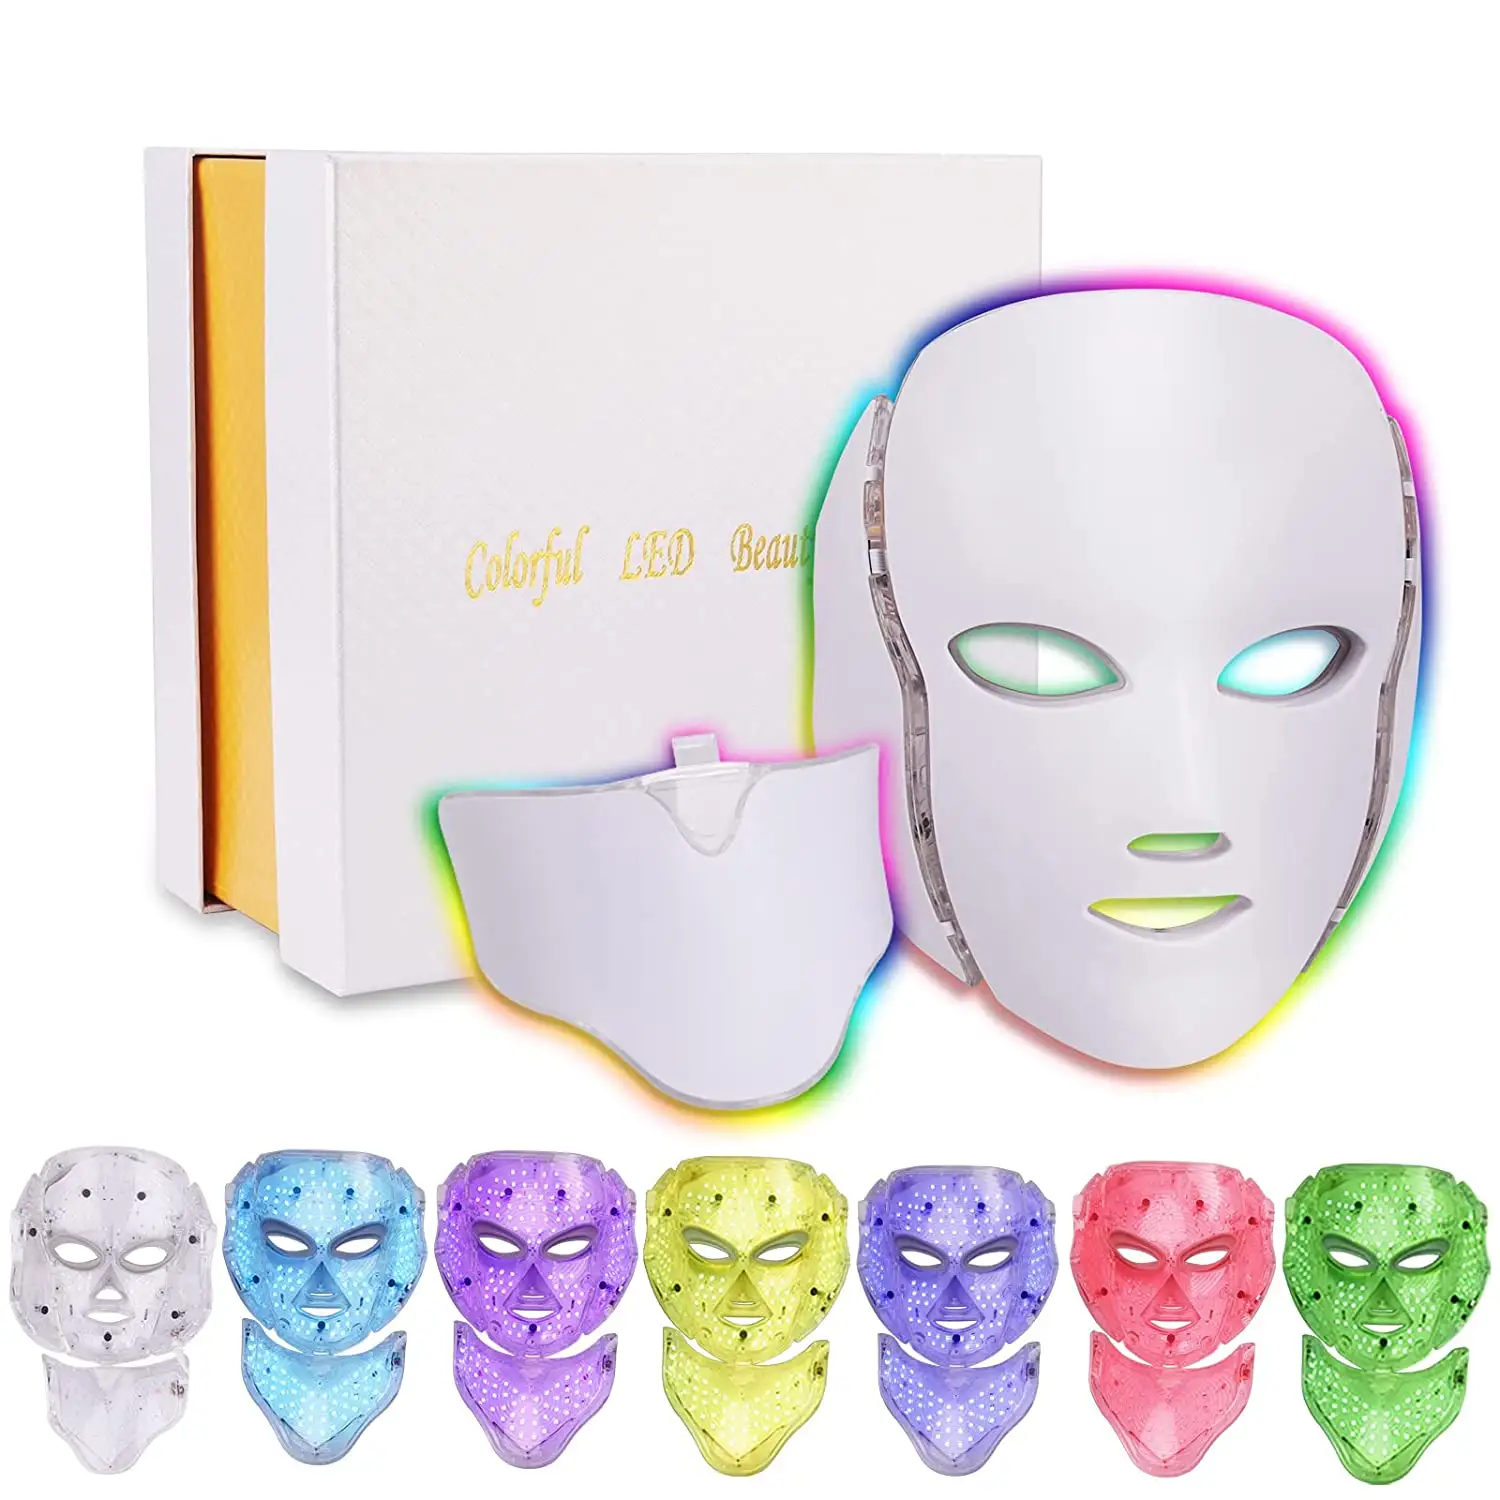 LED Face mask Light Therapy 7 Color Skin Rejuvenation Therapy LED Photon mask Light Facial Anti Aging Skin Tightening Wrinkles